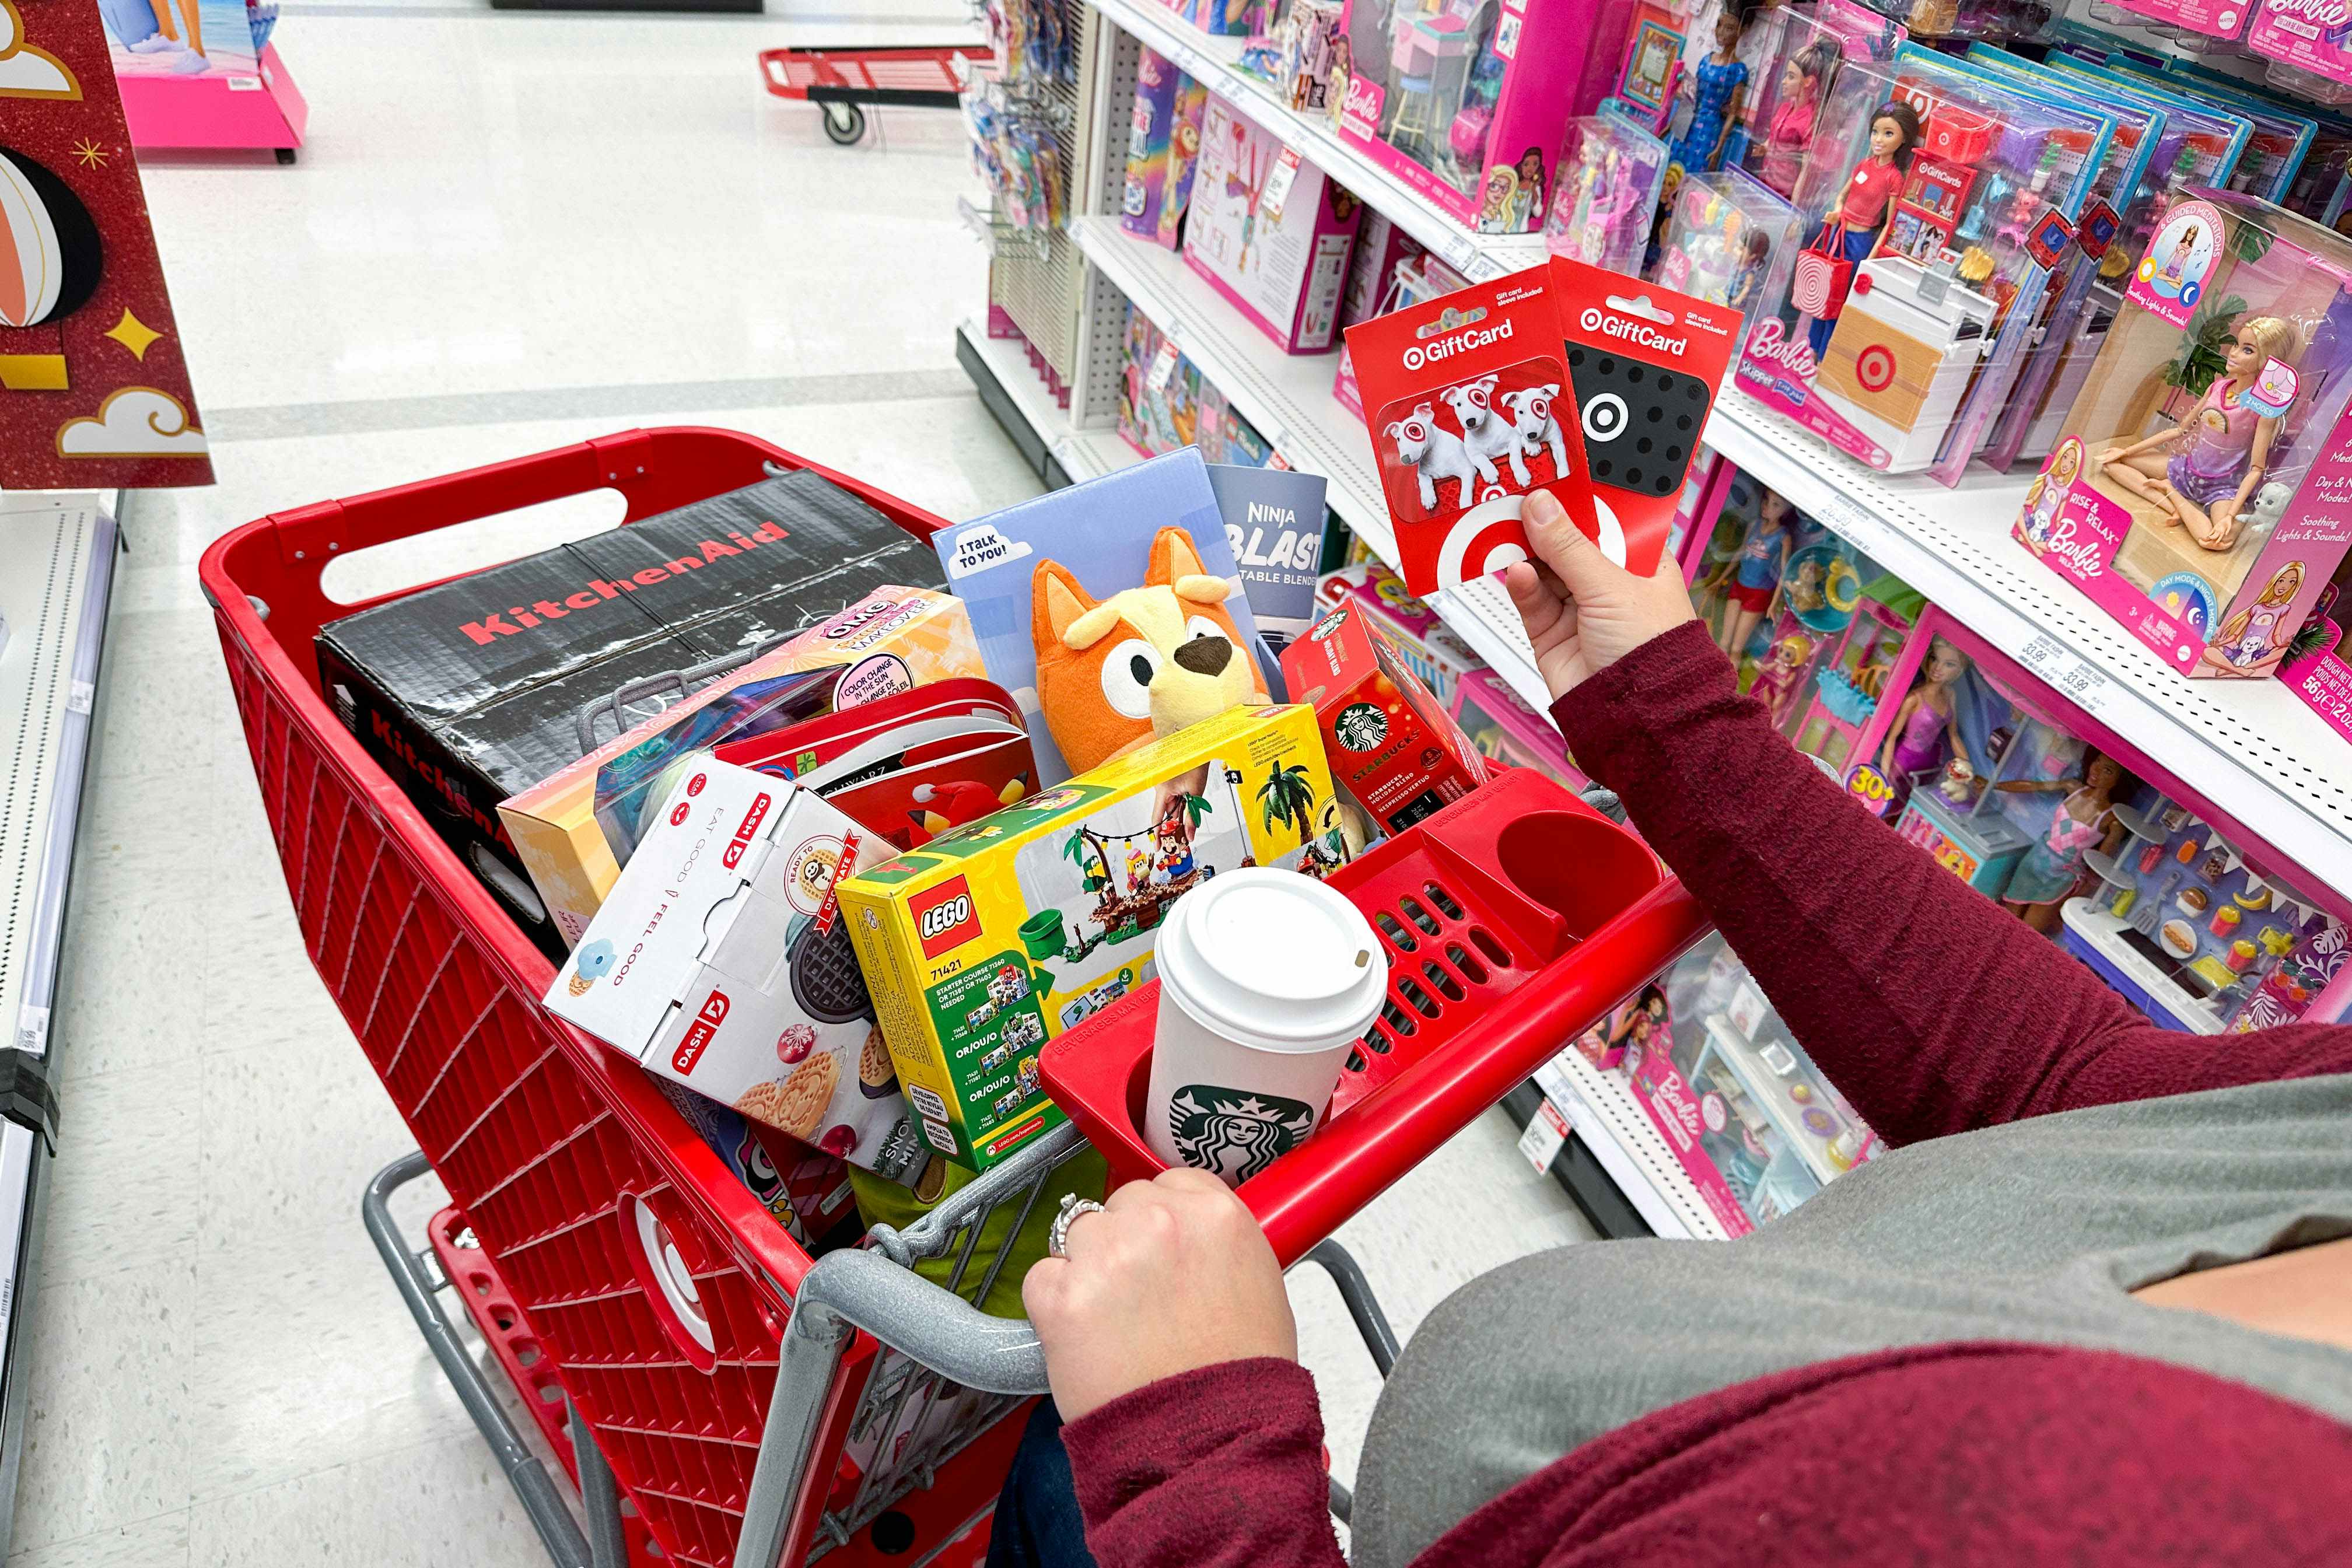 Target - Toy clearance alert! 30-50% off!